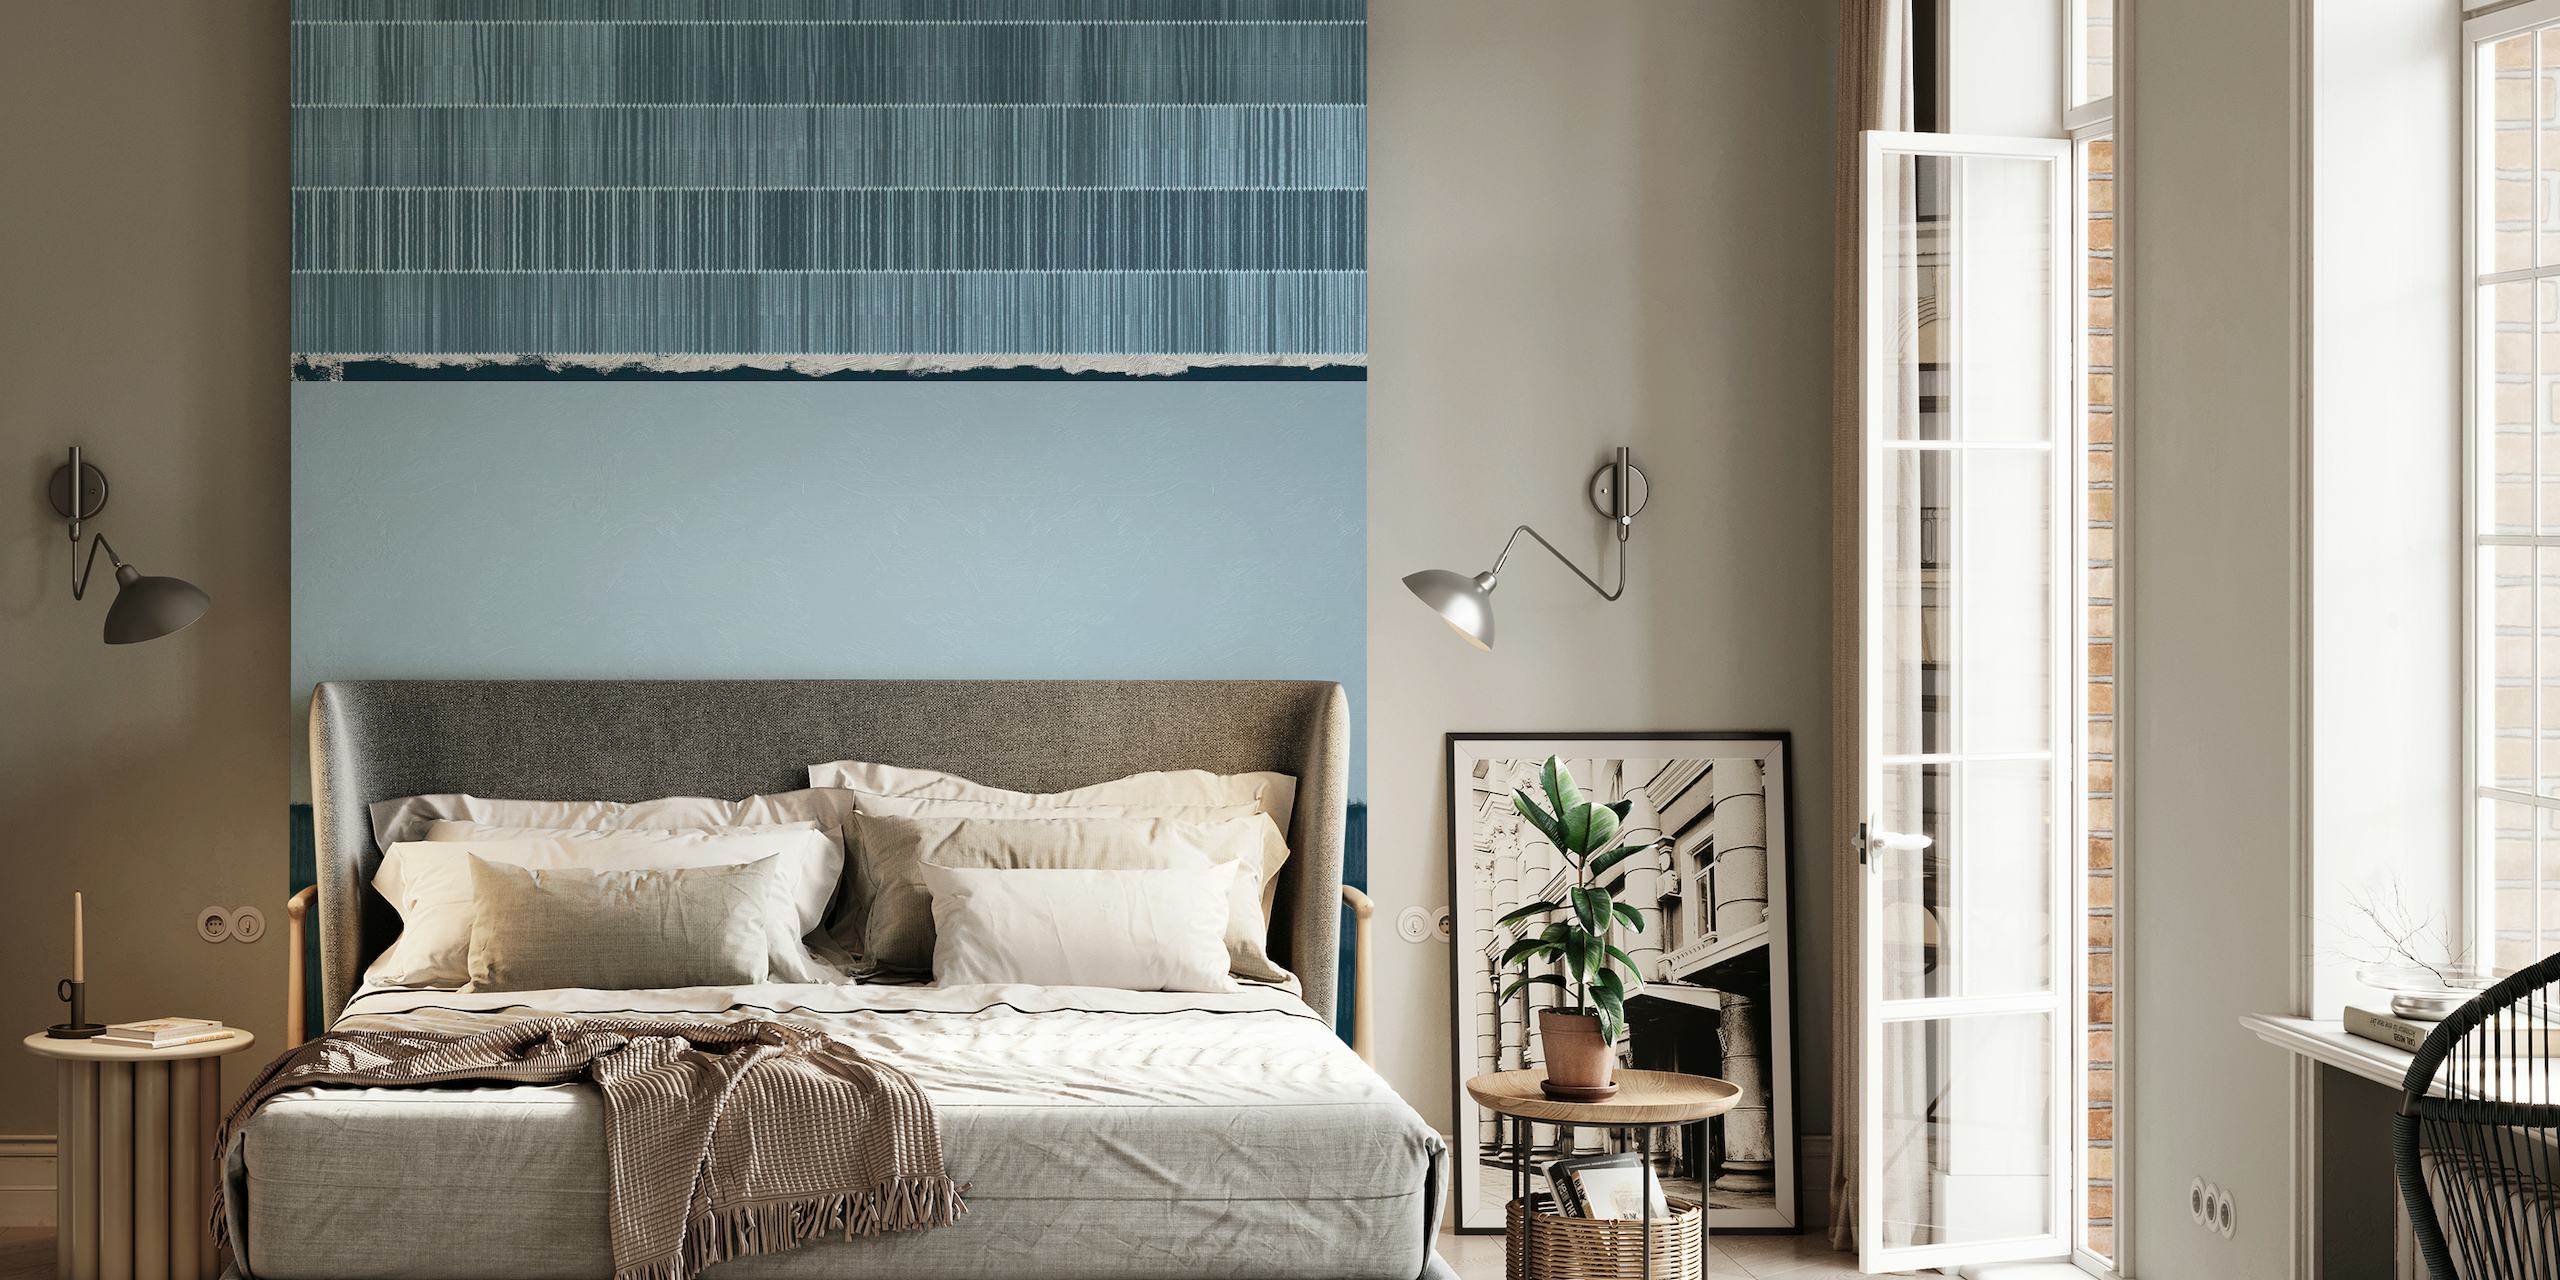 Abstract Blue Line Sky wall mural with calming blue shades and linear details